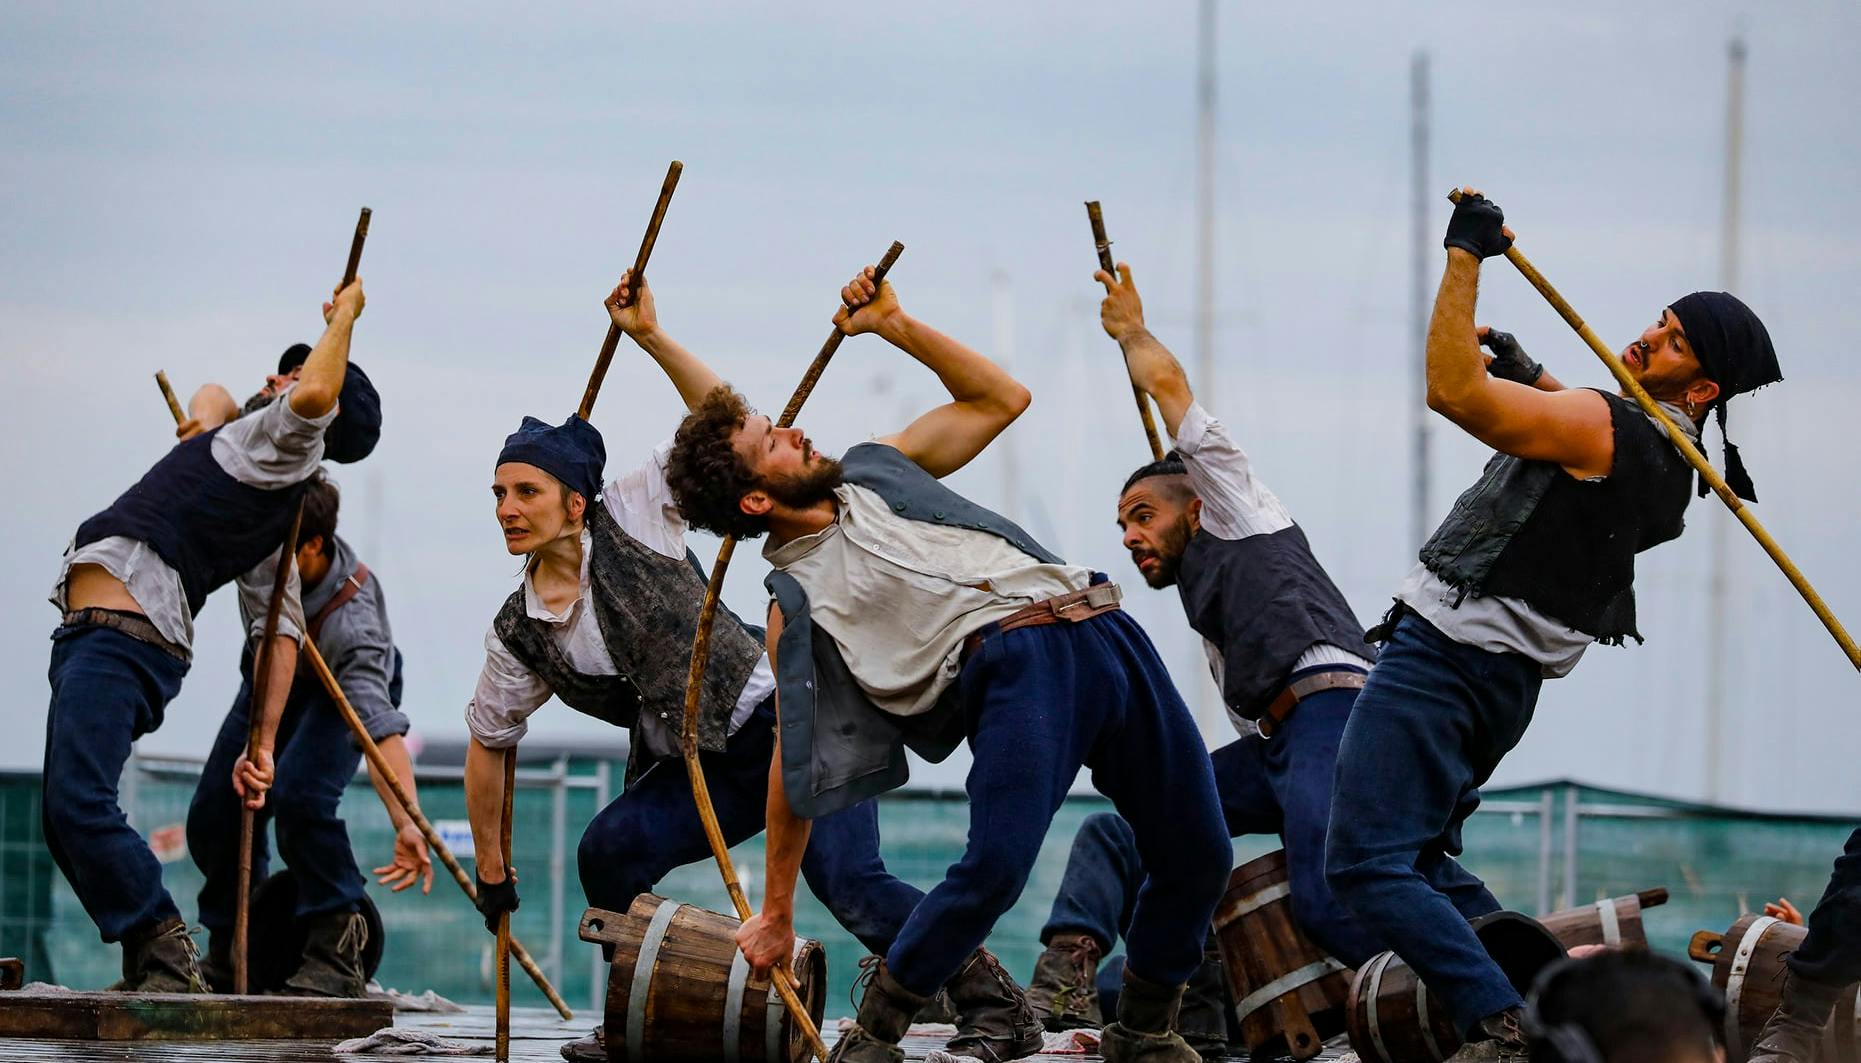 Six dancers dressed as sailors scramble with buckets and sticks in hand